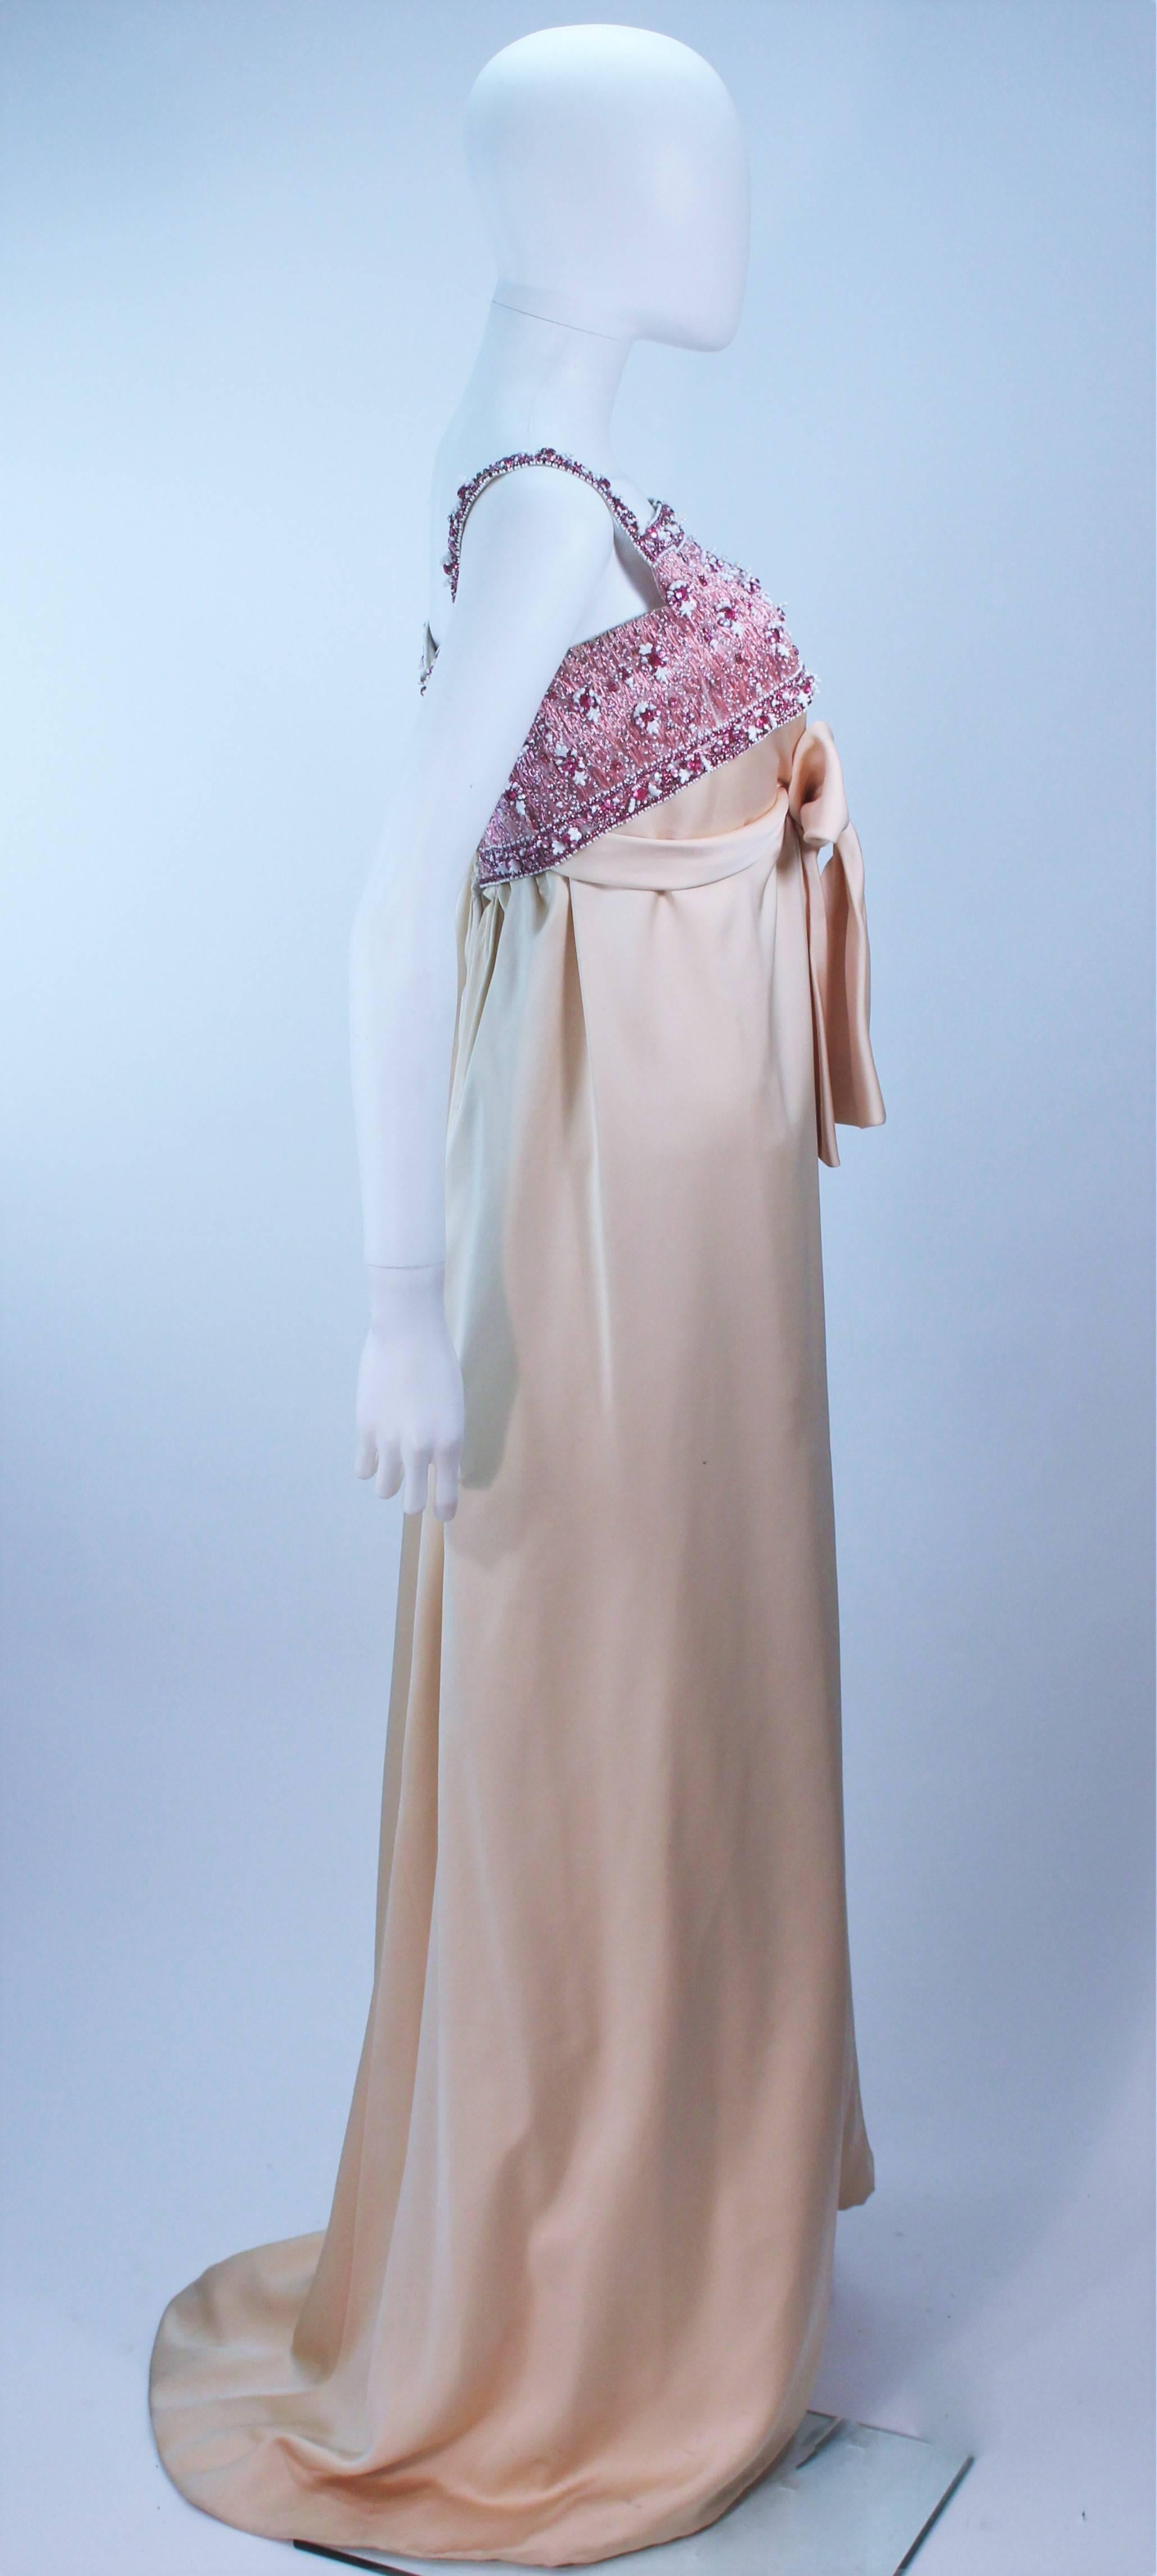 Women's GIVENCHY HAUTE COUTURE Lesage Paris Betsy Bloomingdale Hand Beaded 1960s Gown 0  For Sale